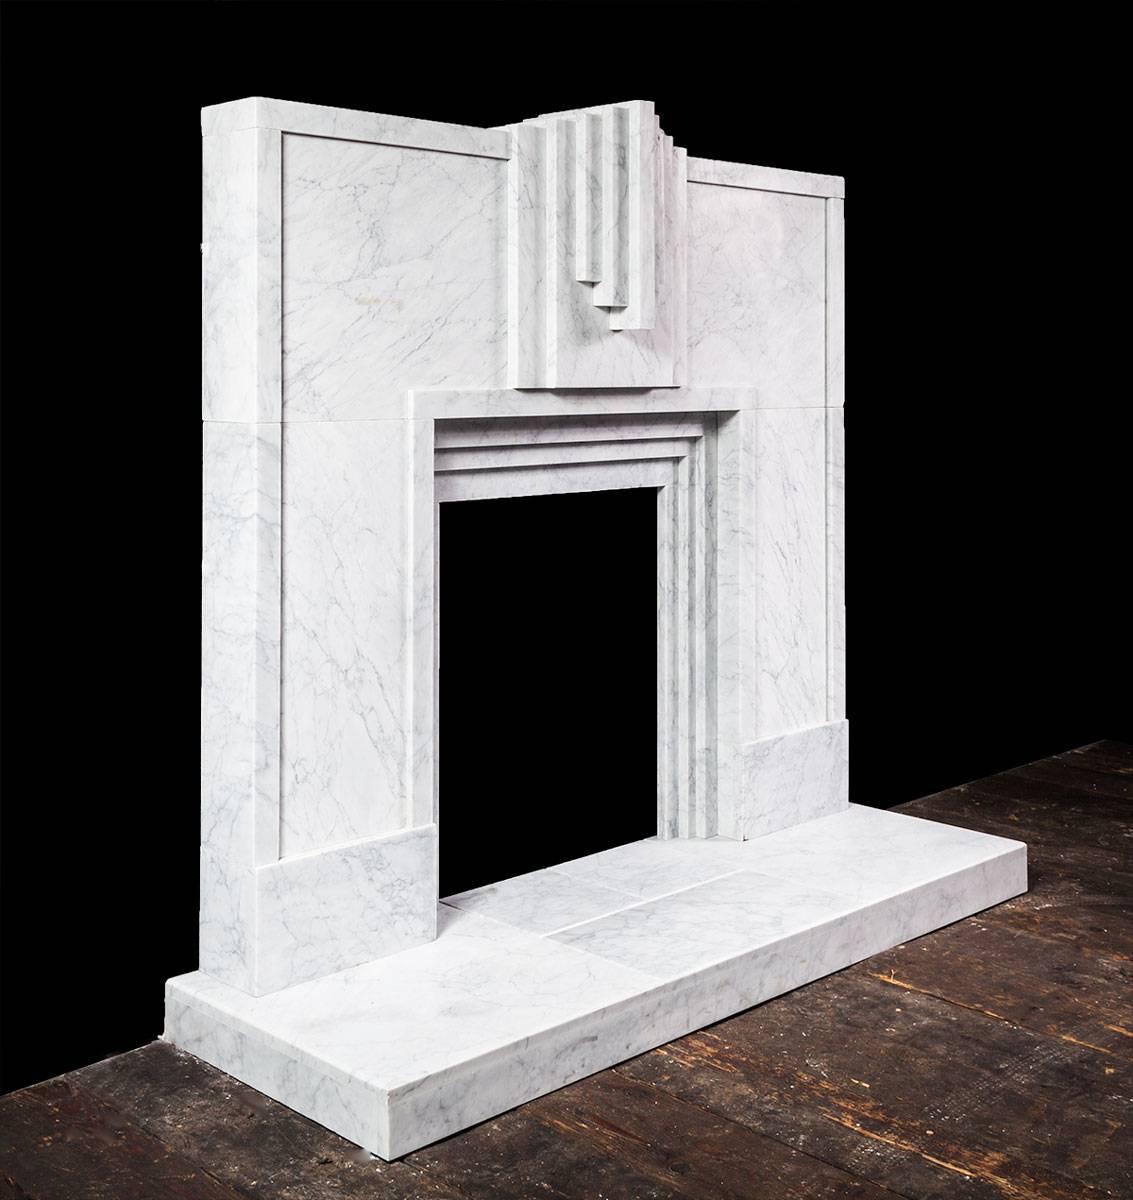 Made from beautifully veined Italian Carrara marble, the fireplace features strong, clean and bold geometric lines, all typical of the 1920s Art Deco style.
   